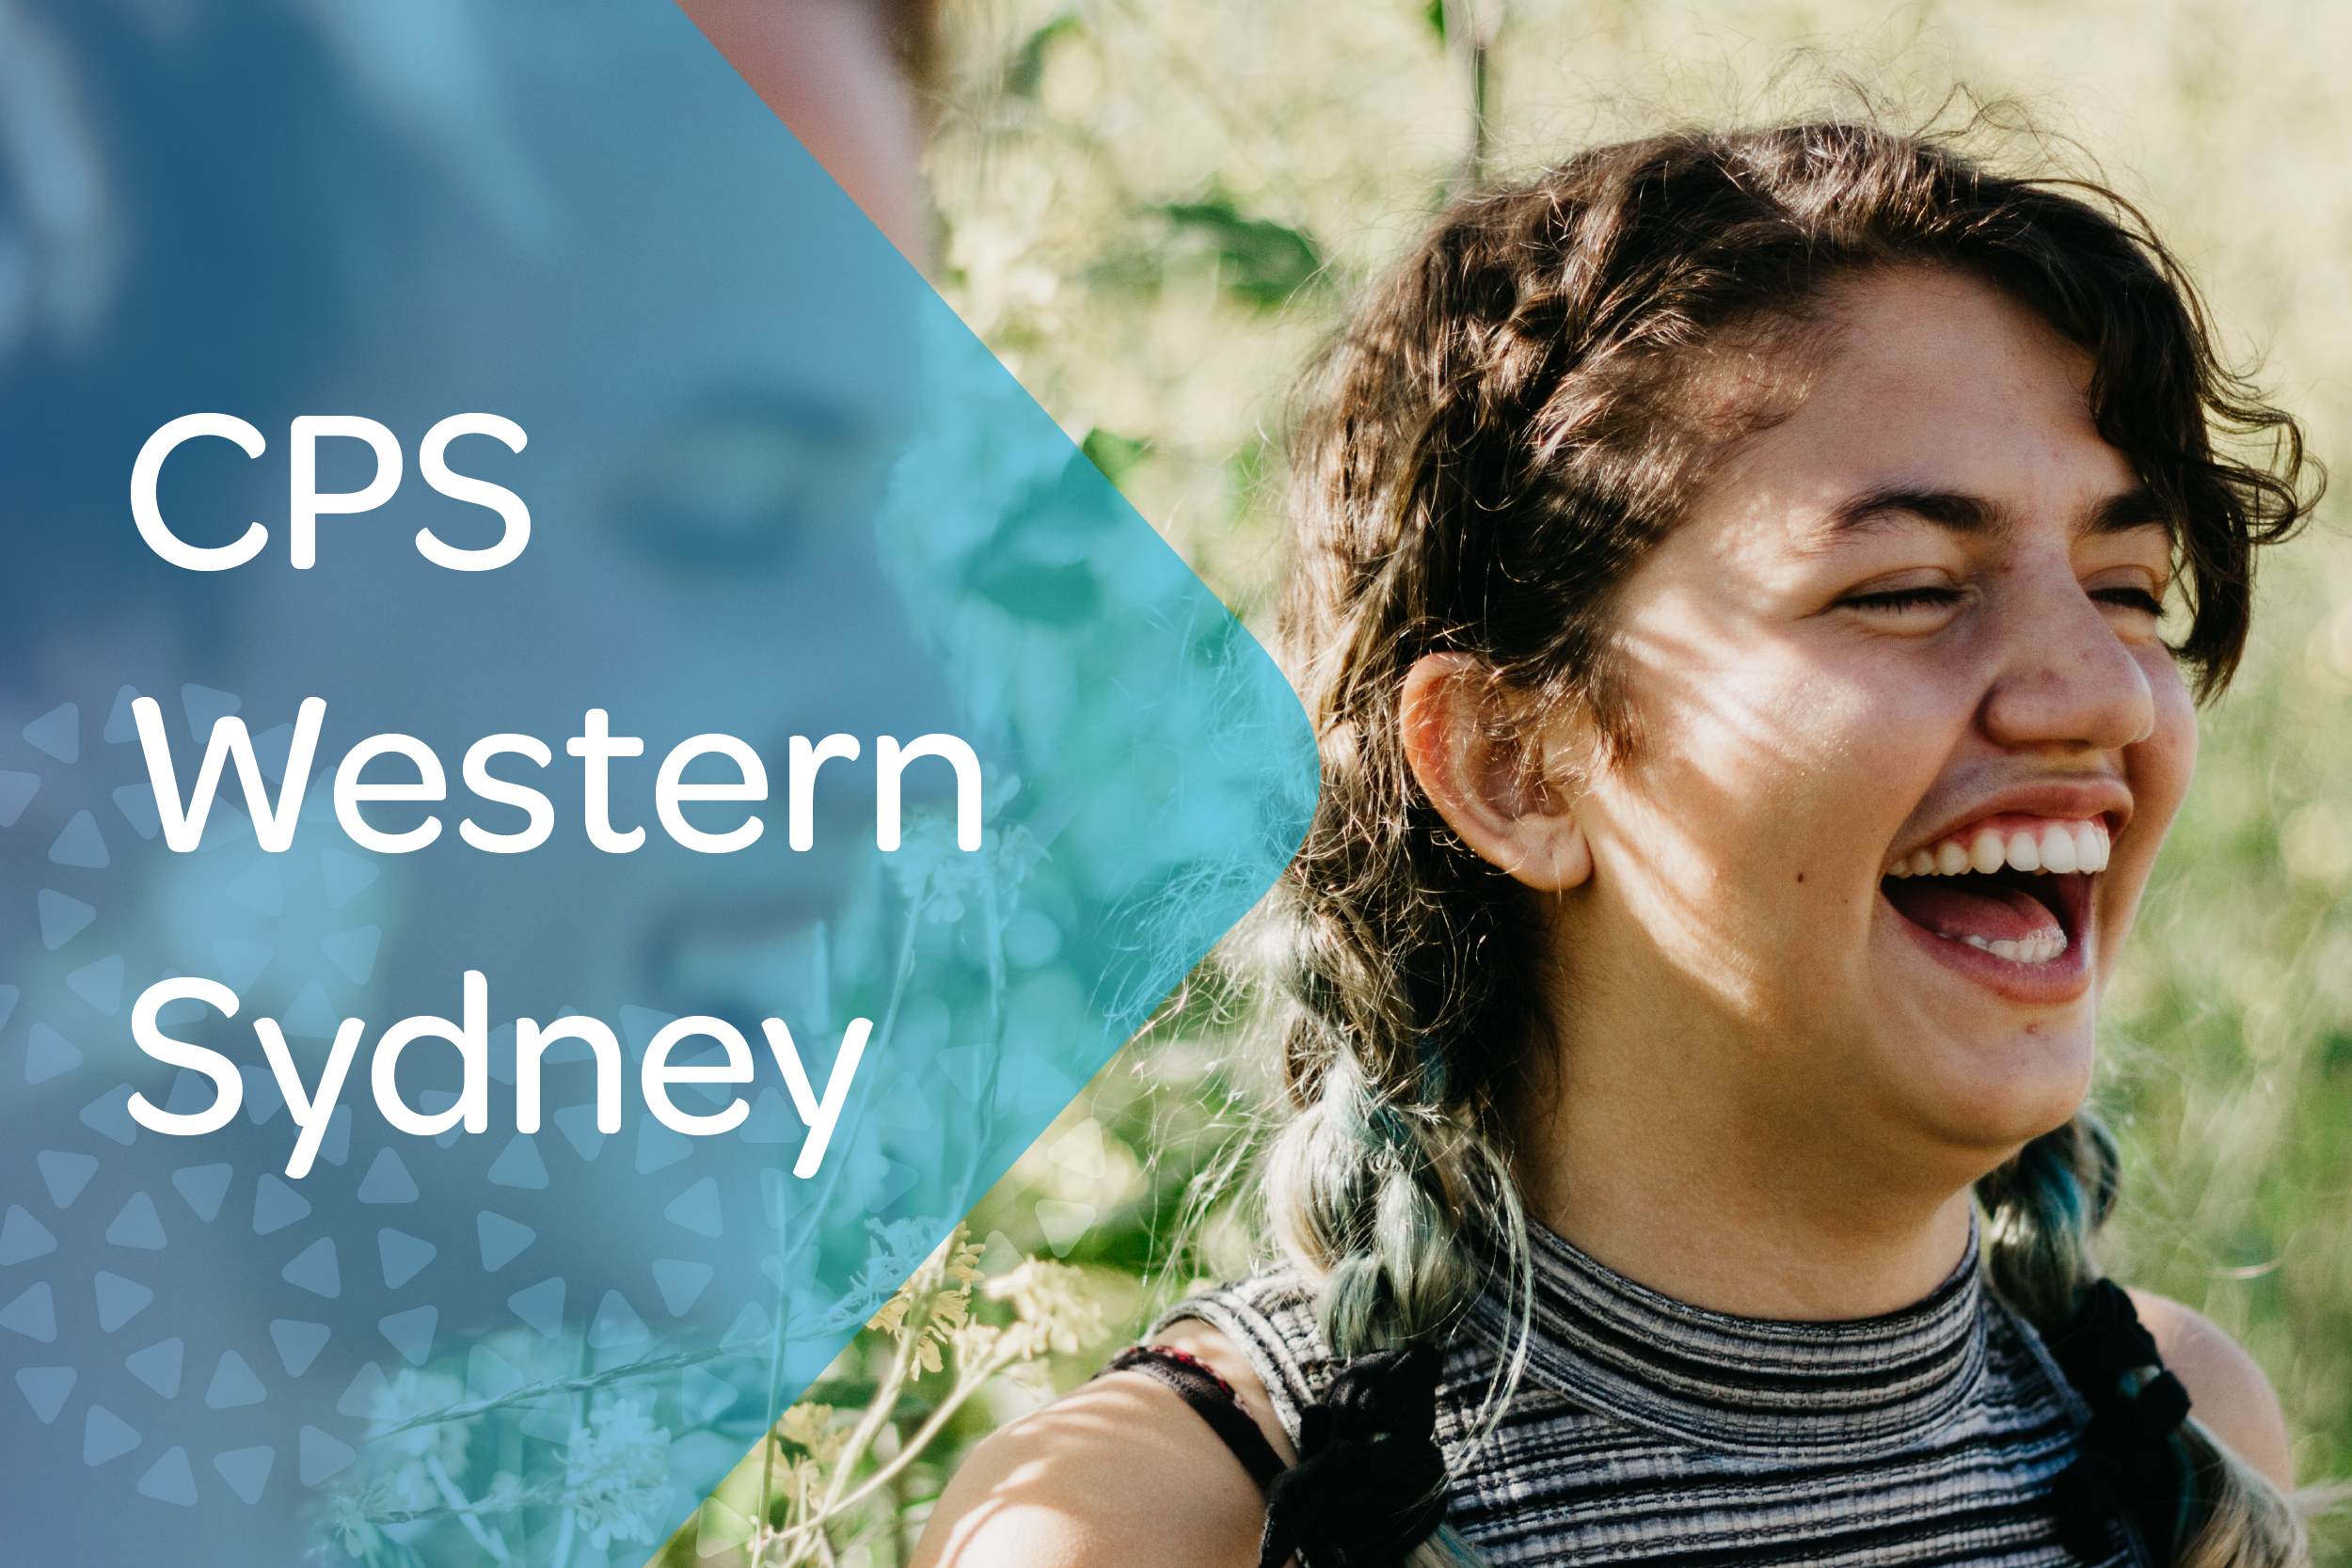 A close-up photo of a young girl laughing outdoors, with a radiant smile and the sun and CPS Western Sydney overlay